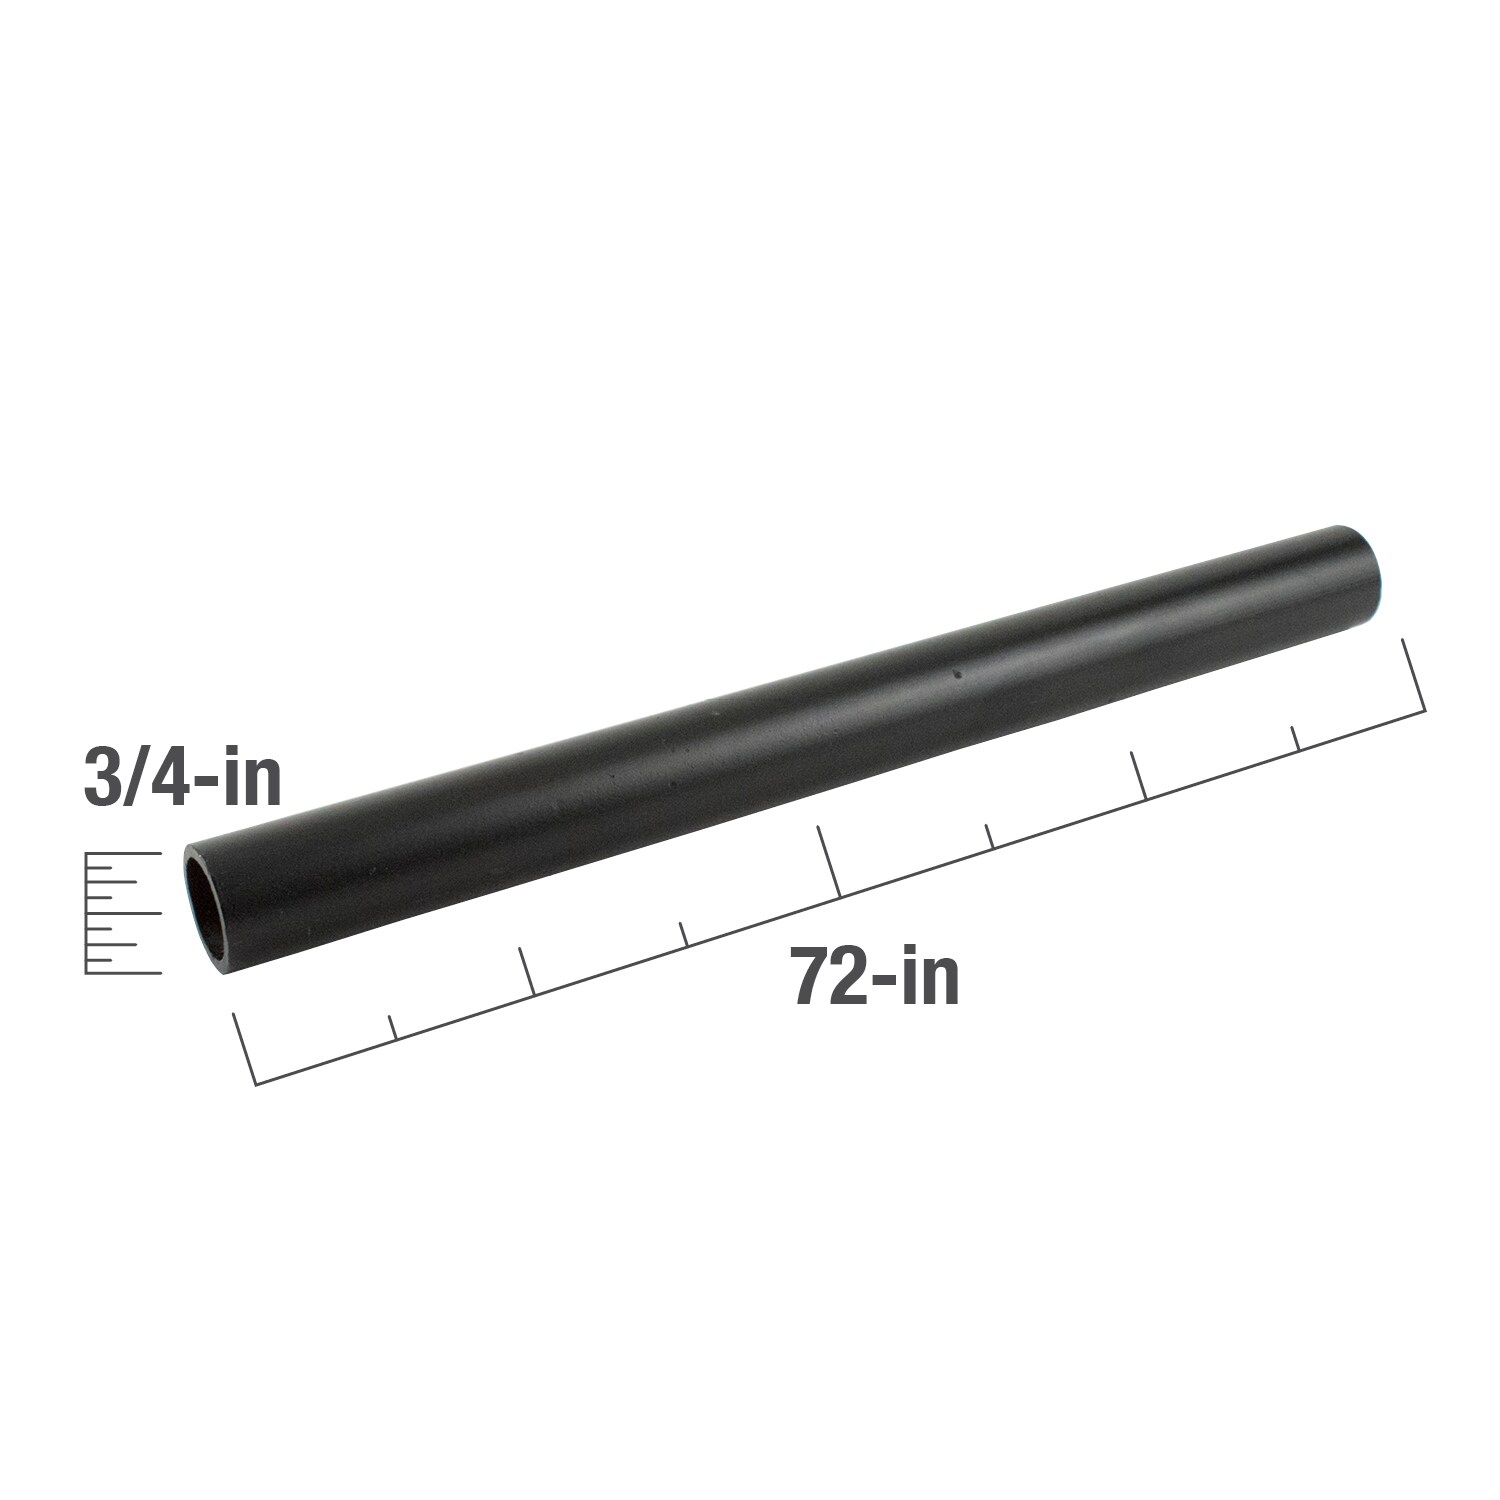 SteelTek 3/4-in x 72-in Structural Black Pipe in the Structural